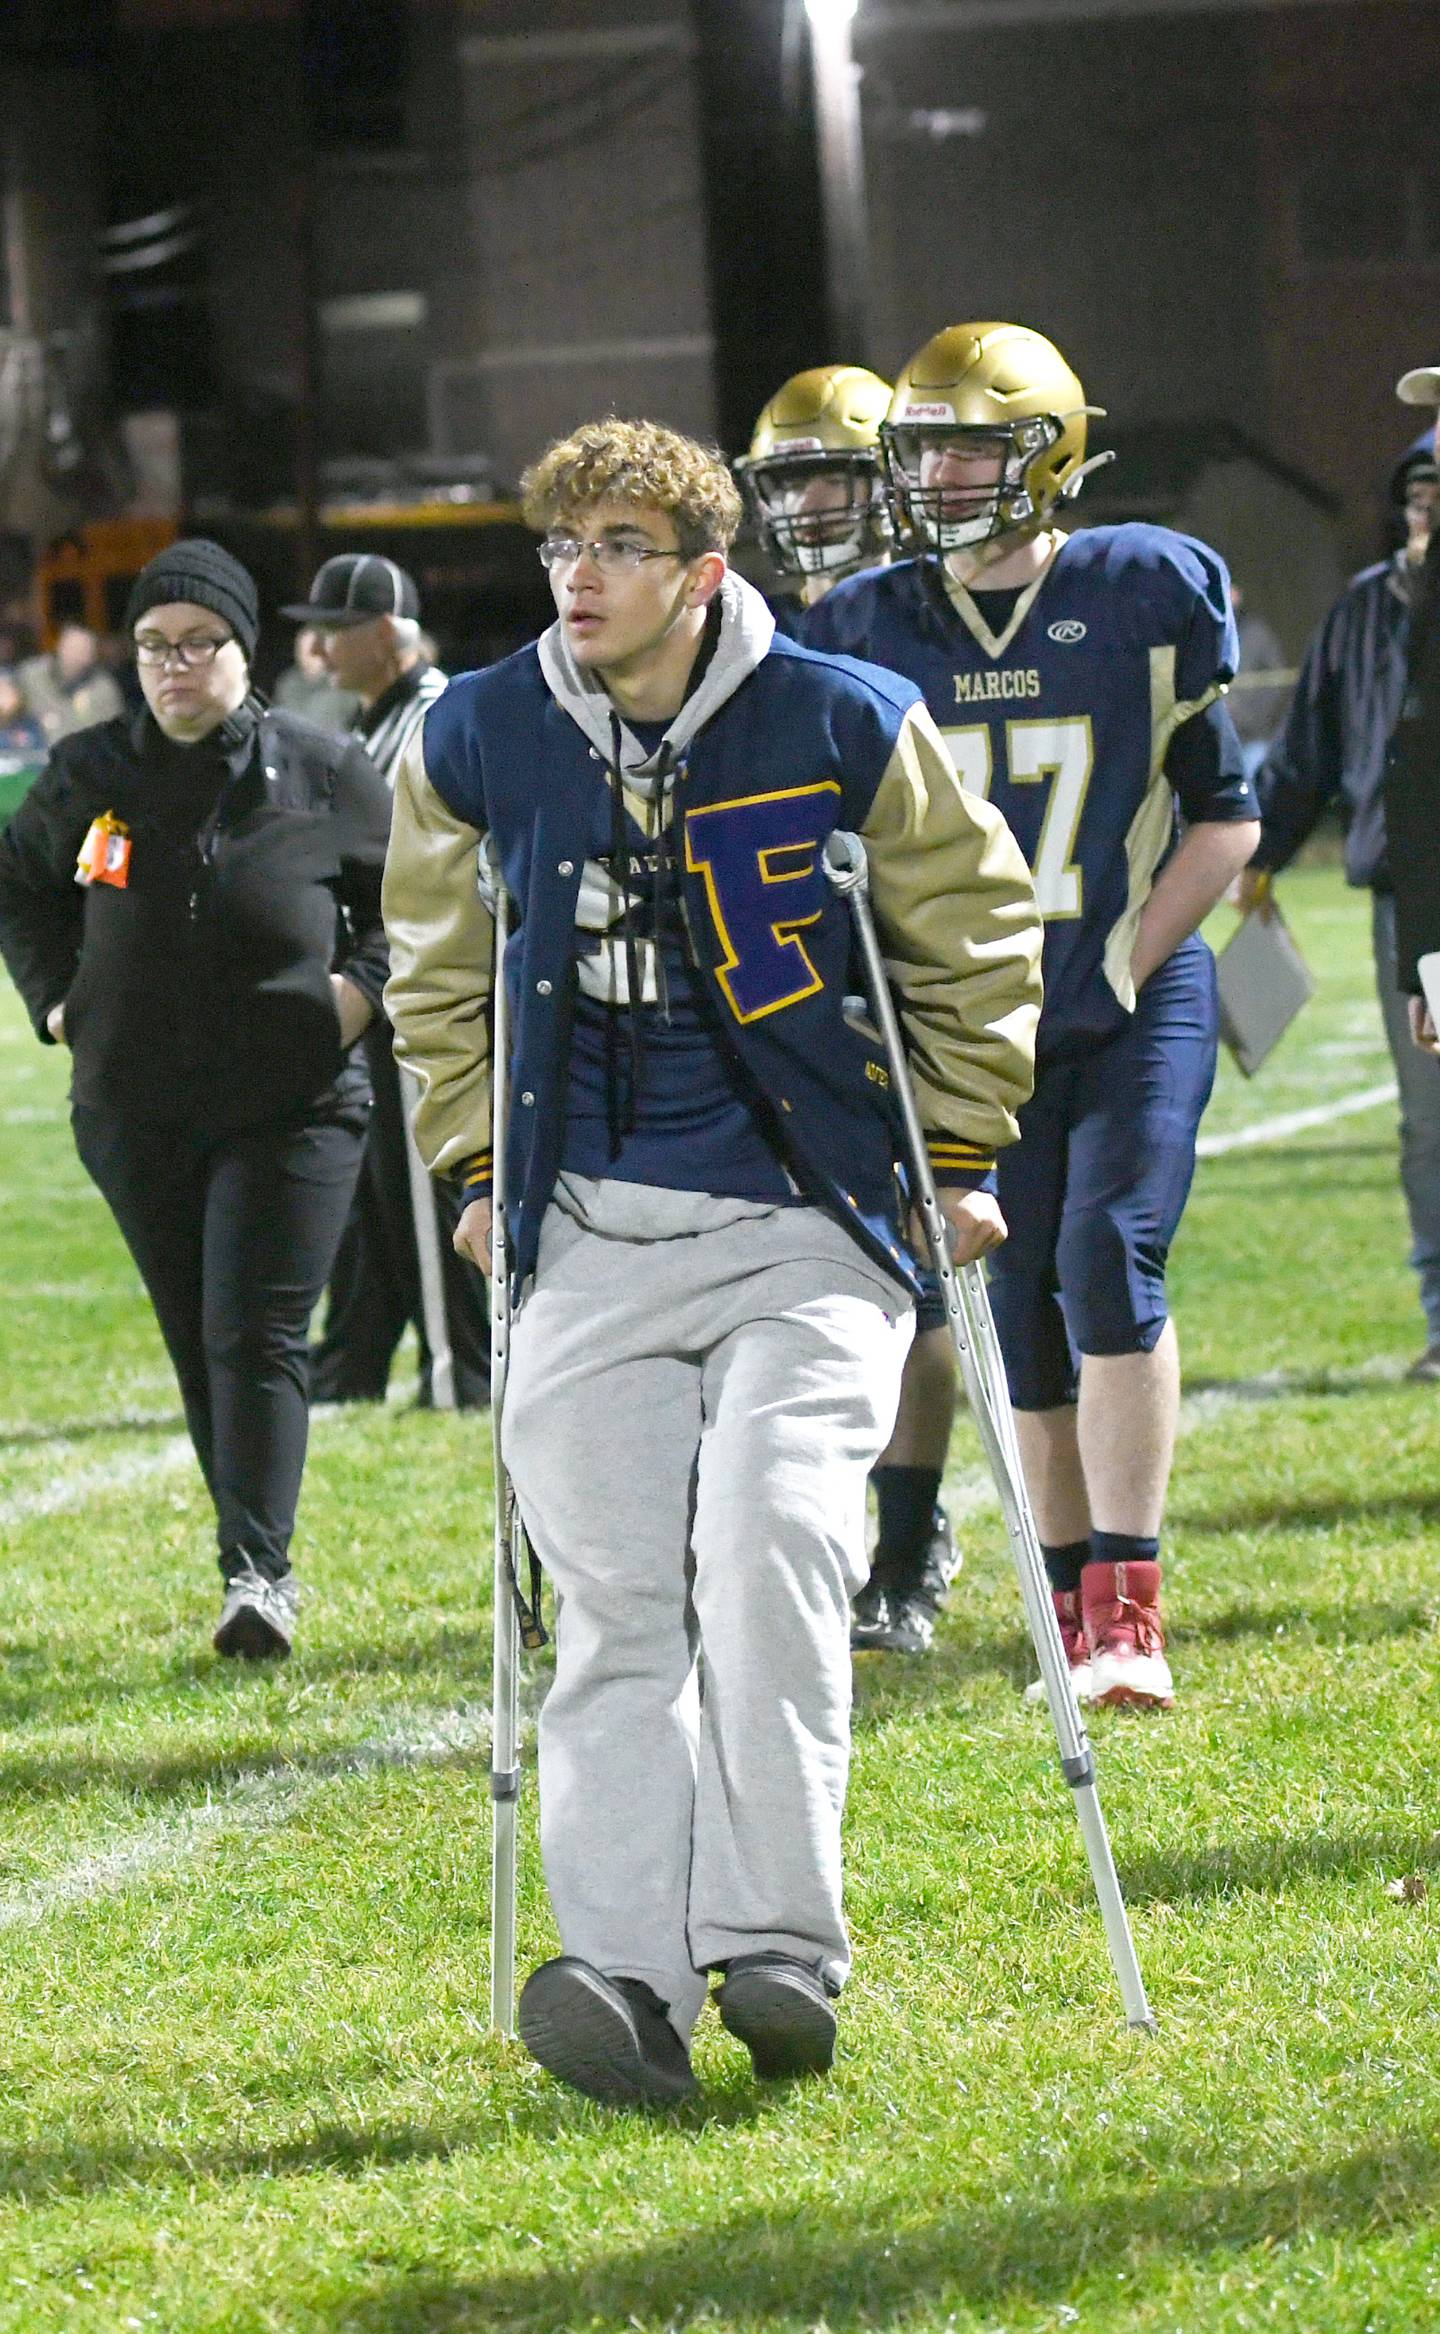 Polo's Avery Grenoble walks the Marcos' sideline on crutches during the first round 8-man playoff action against Kirkland Hiawatha on Friday, Oct. 28. Grenoble was injured during practice one day before the first round playoff game.